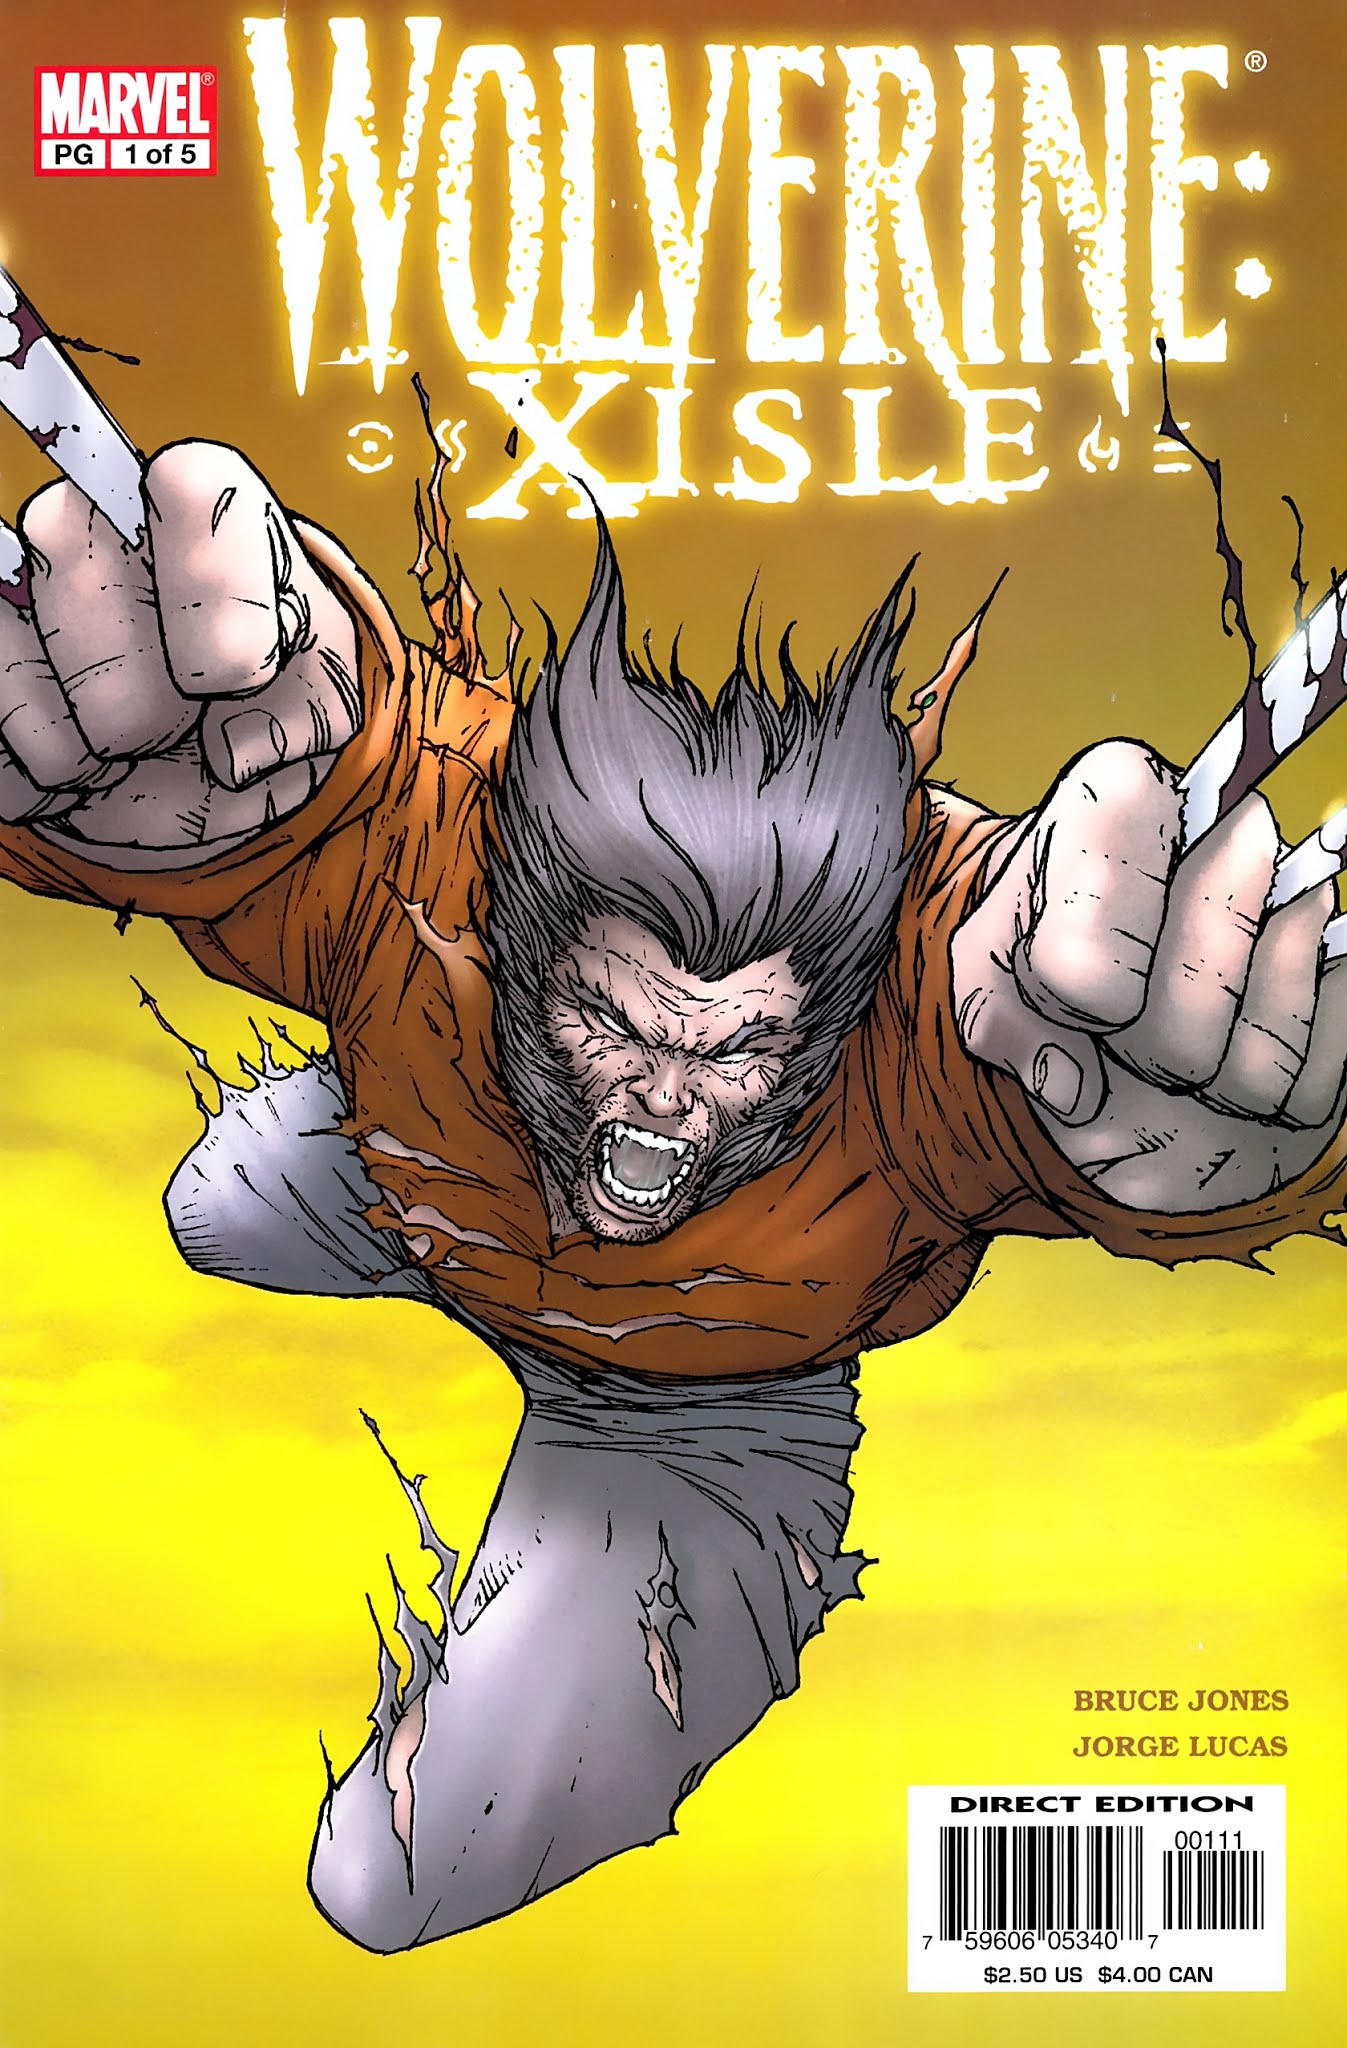 Read online Wolverine: Xisle comic -  Issue #1 - 1